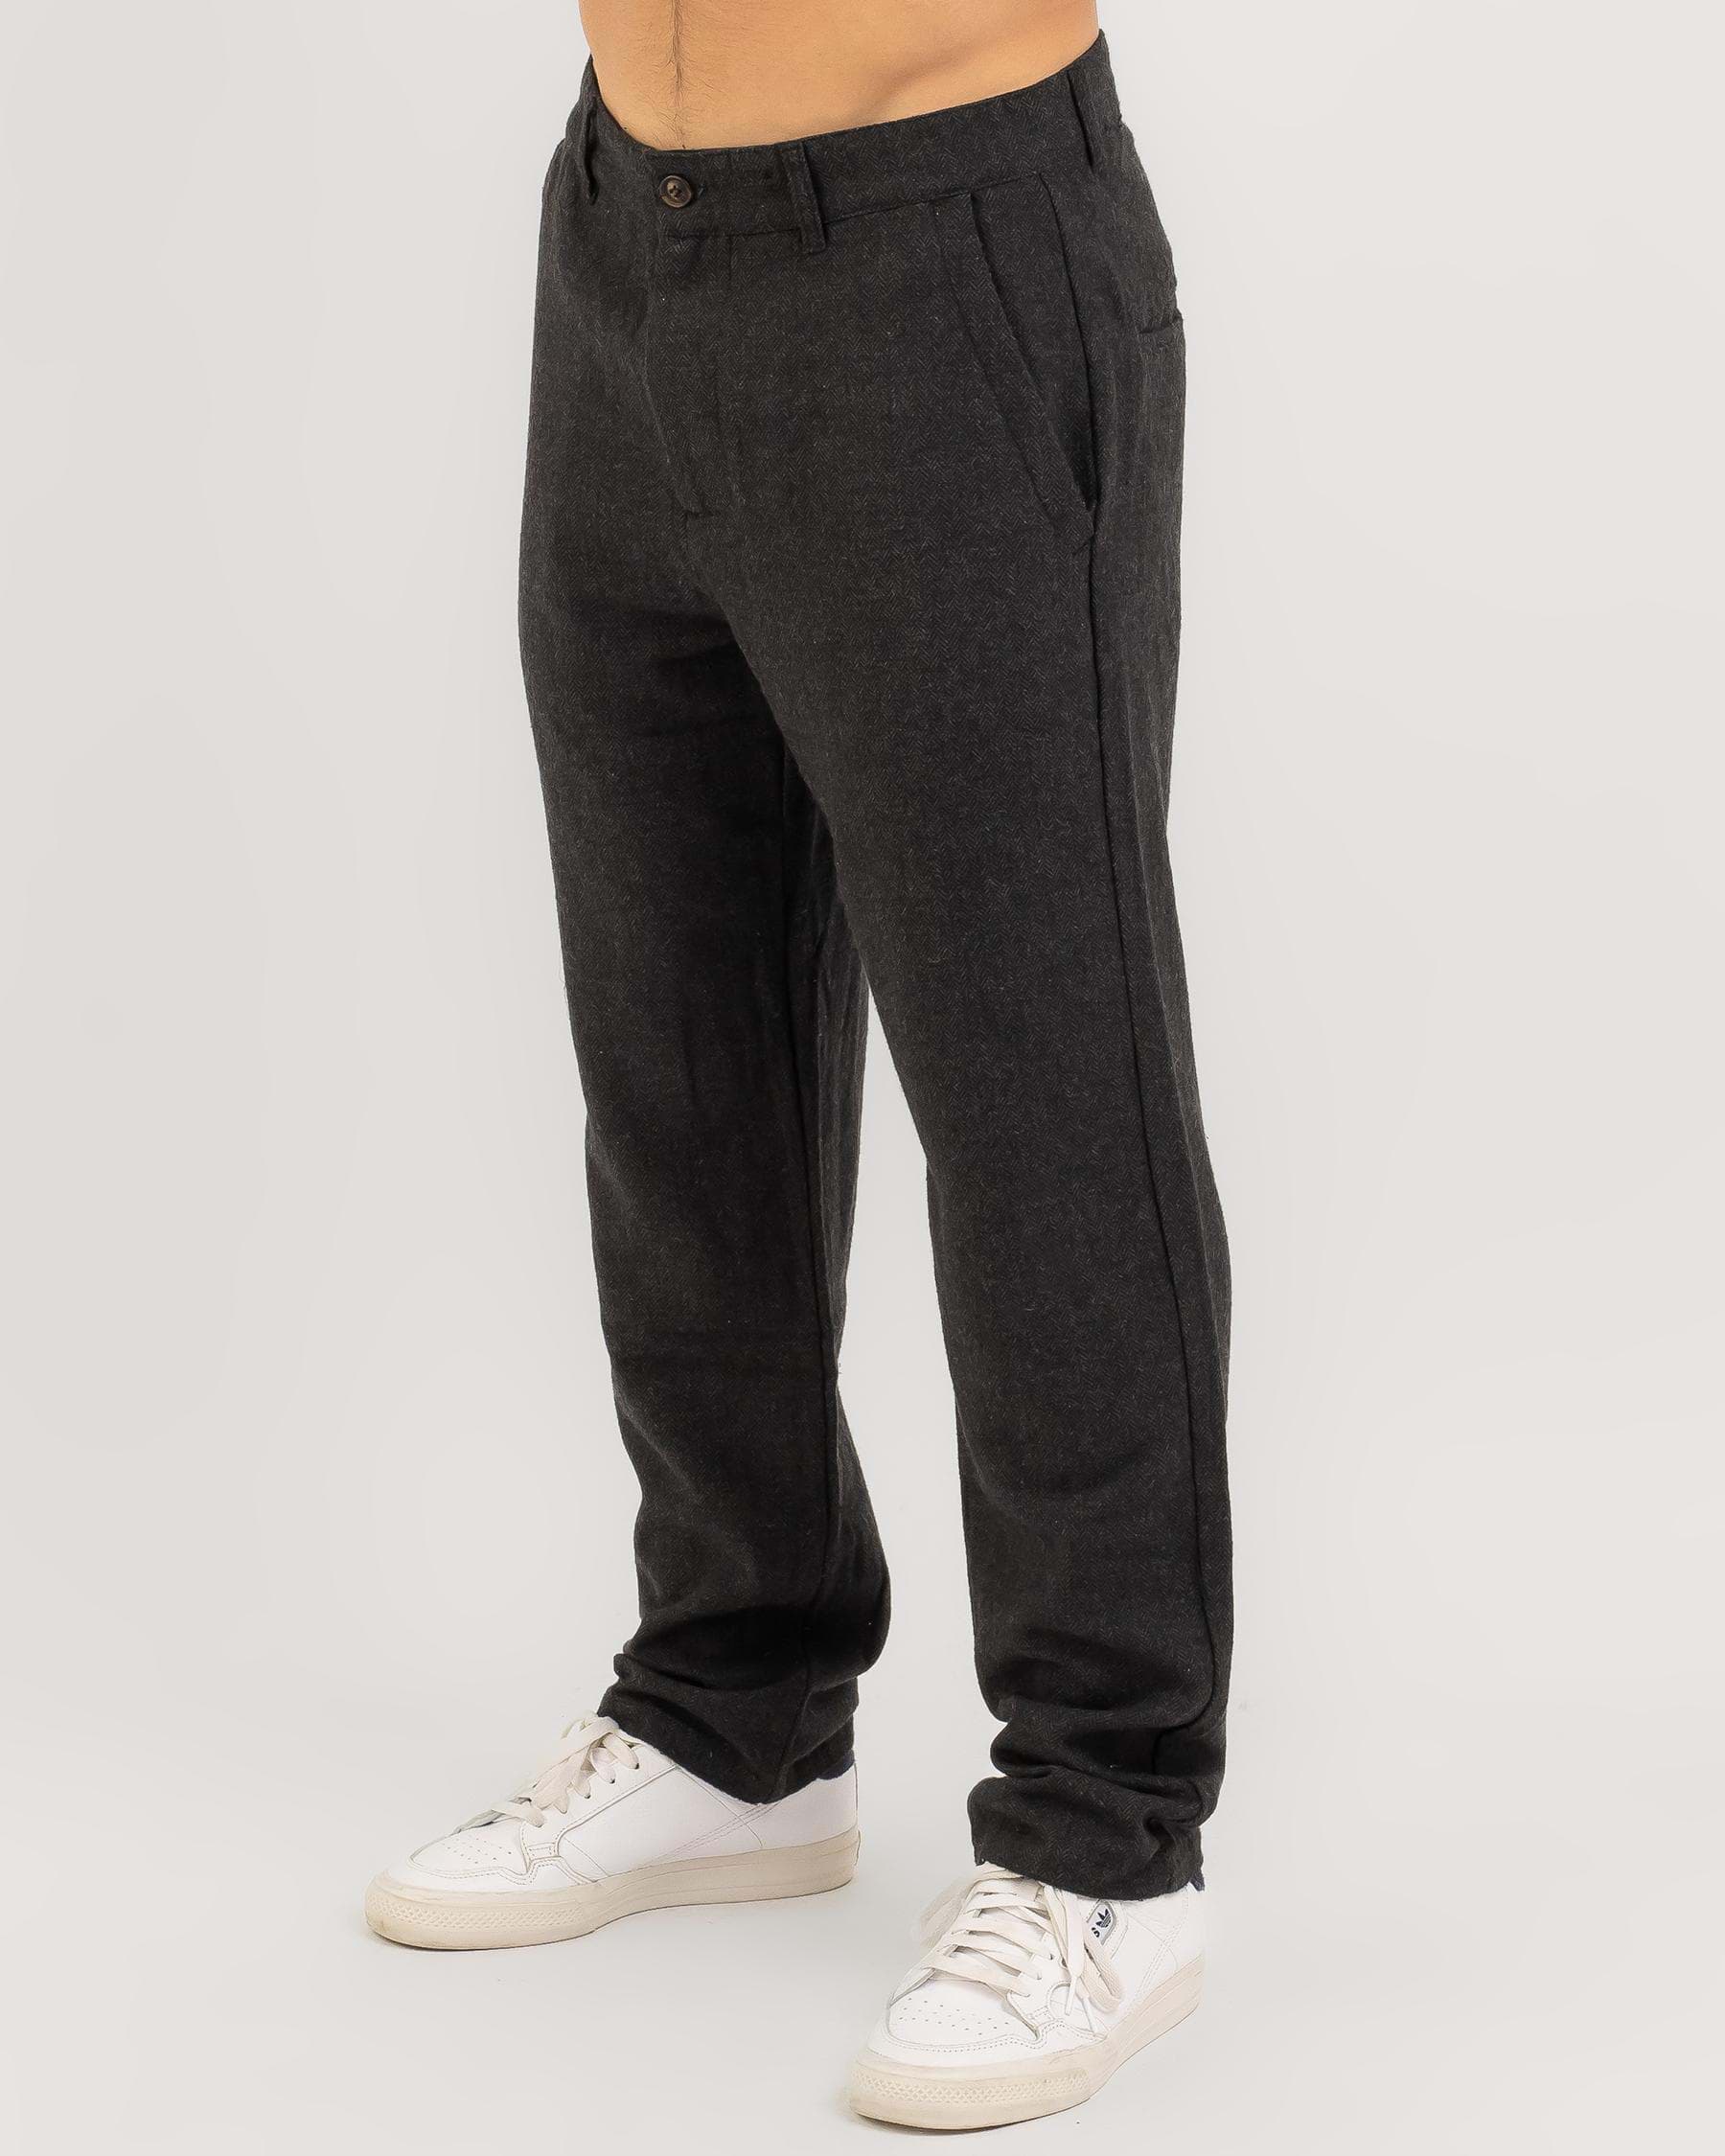 Shop Rhythm Essential Trouser Pants In Charcoal - Fast Shipping & Easy ...